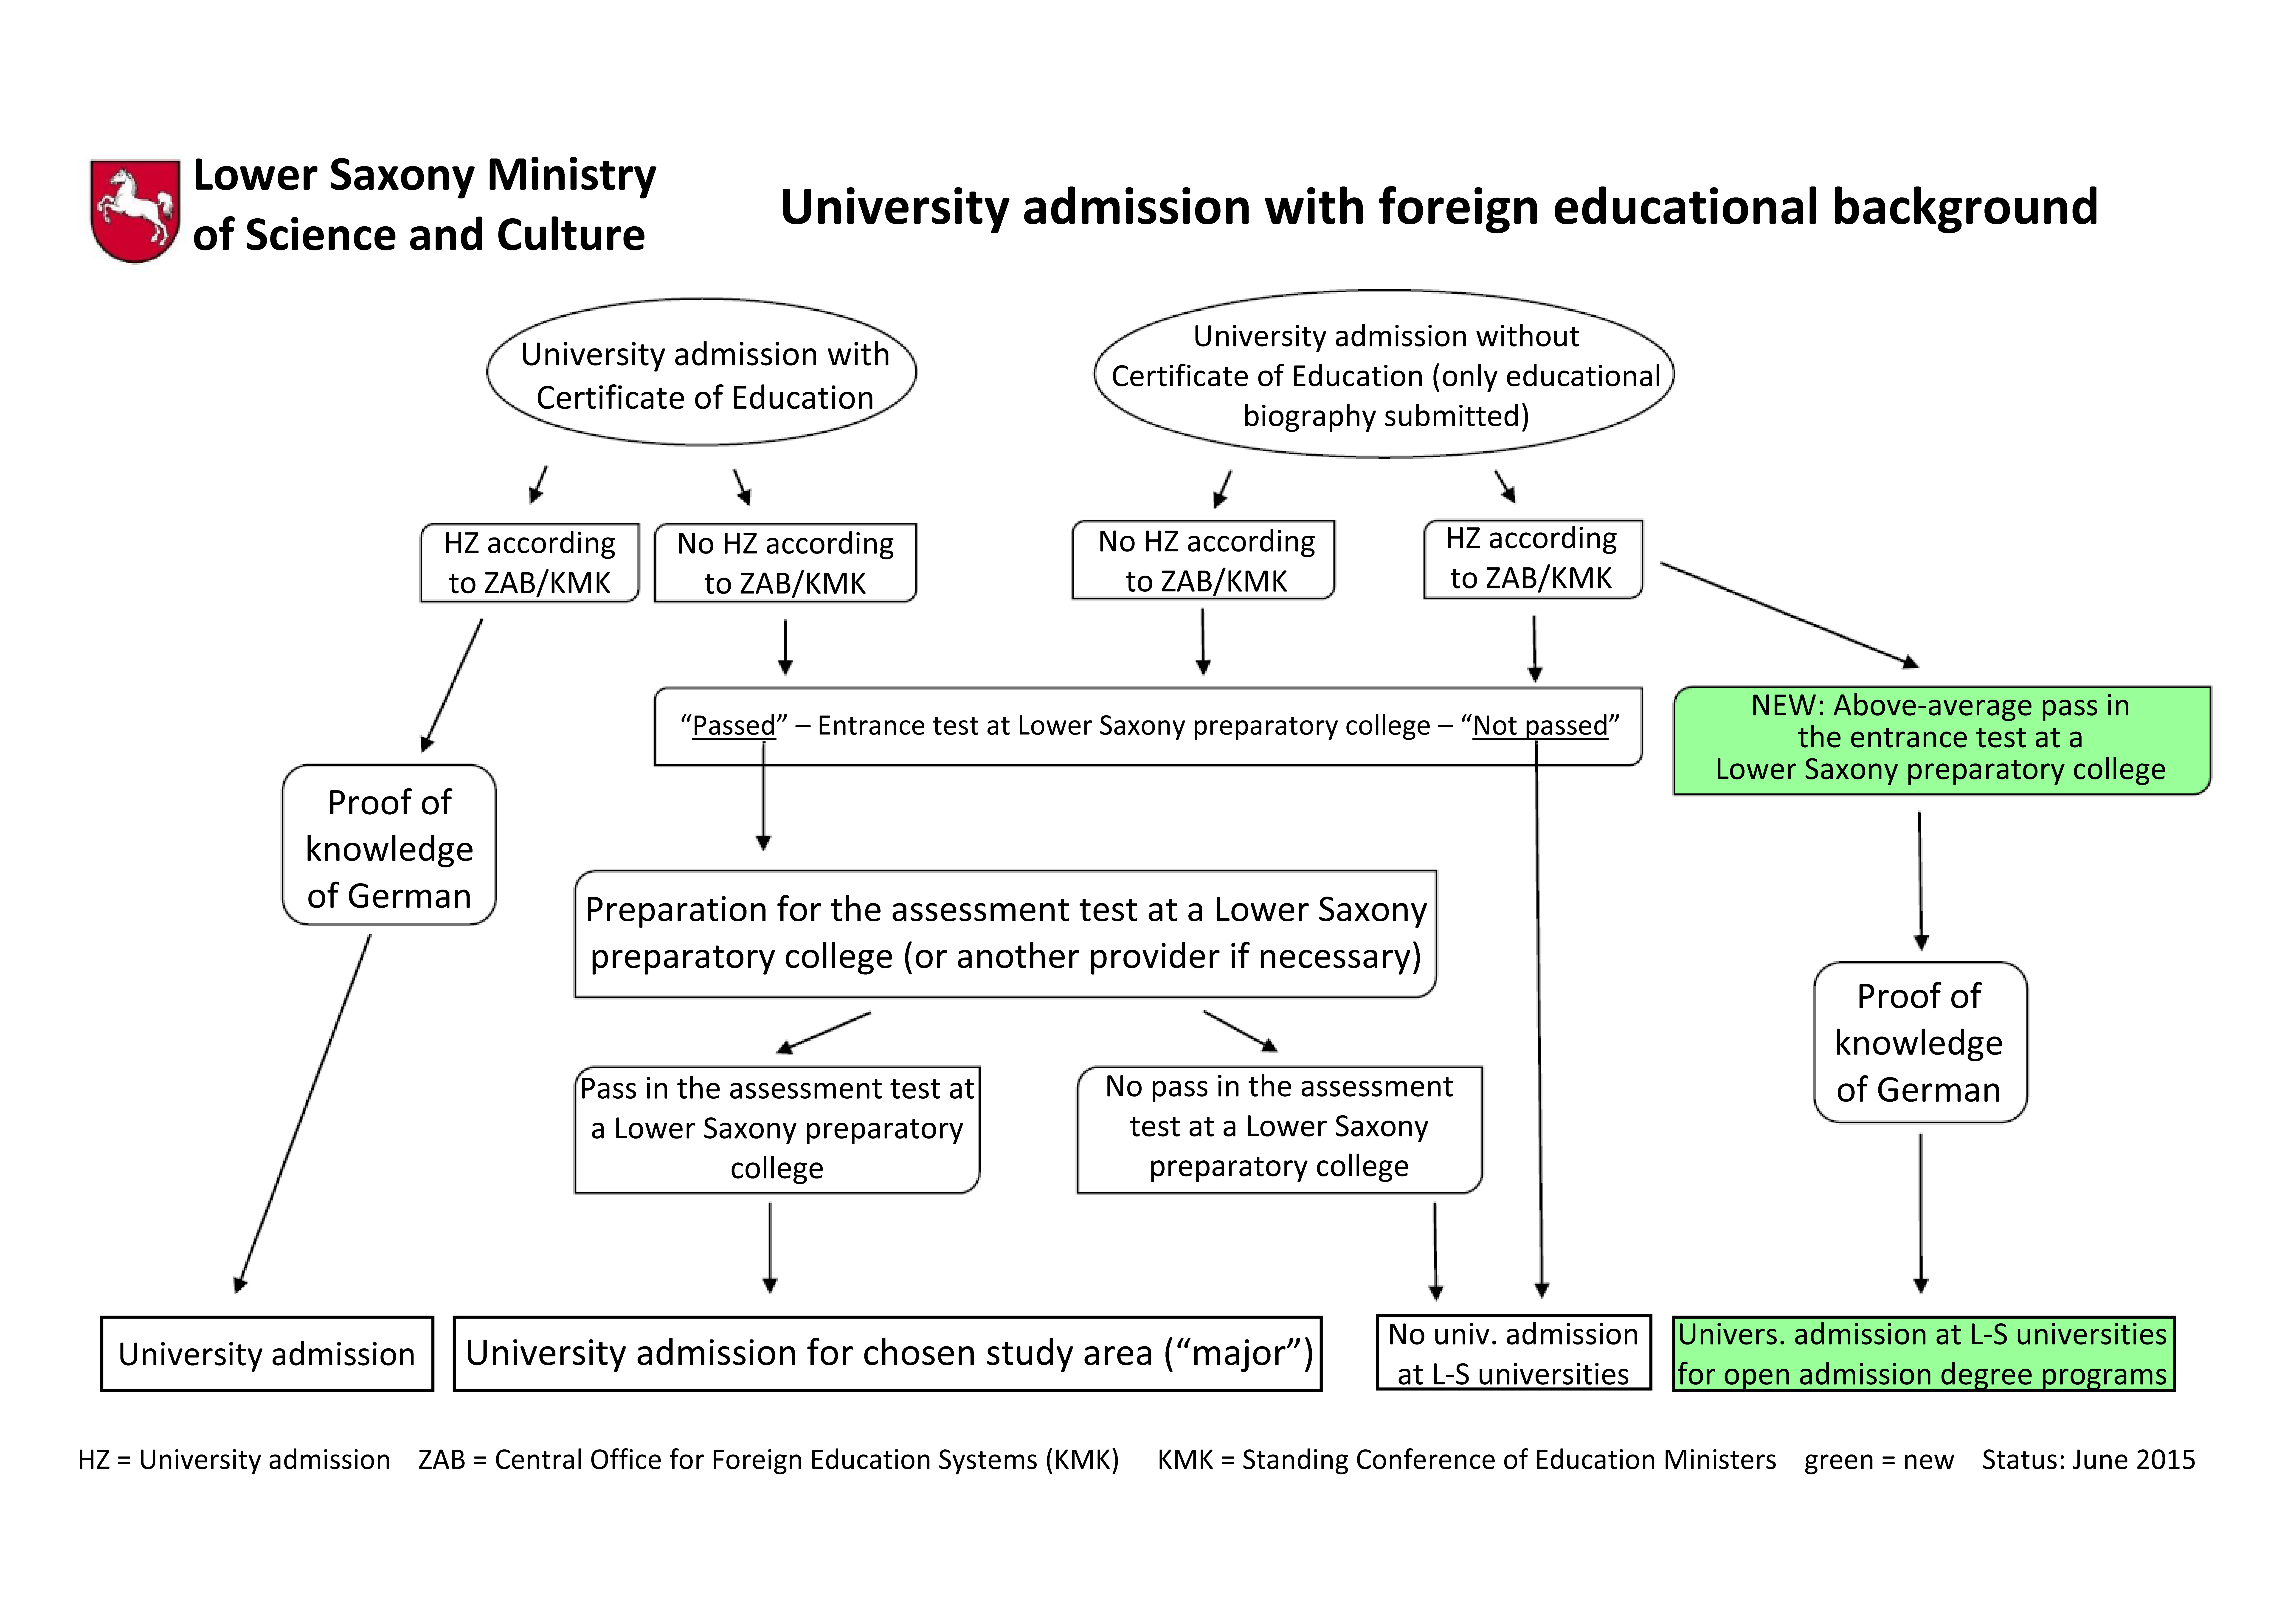 Diagram showing university admission with foreign educational background